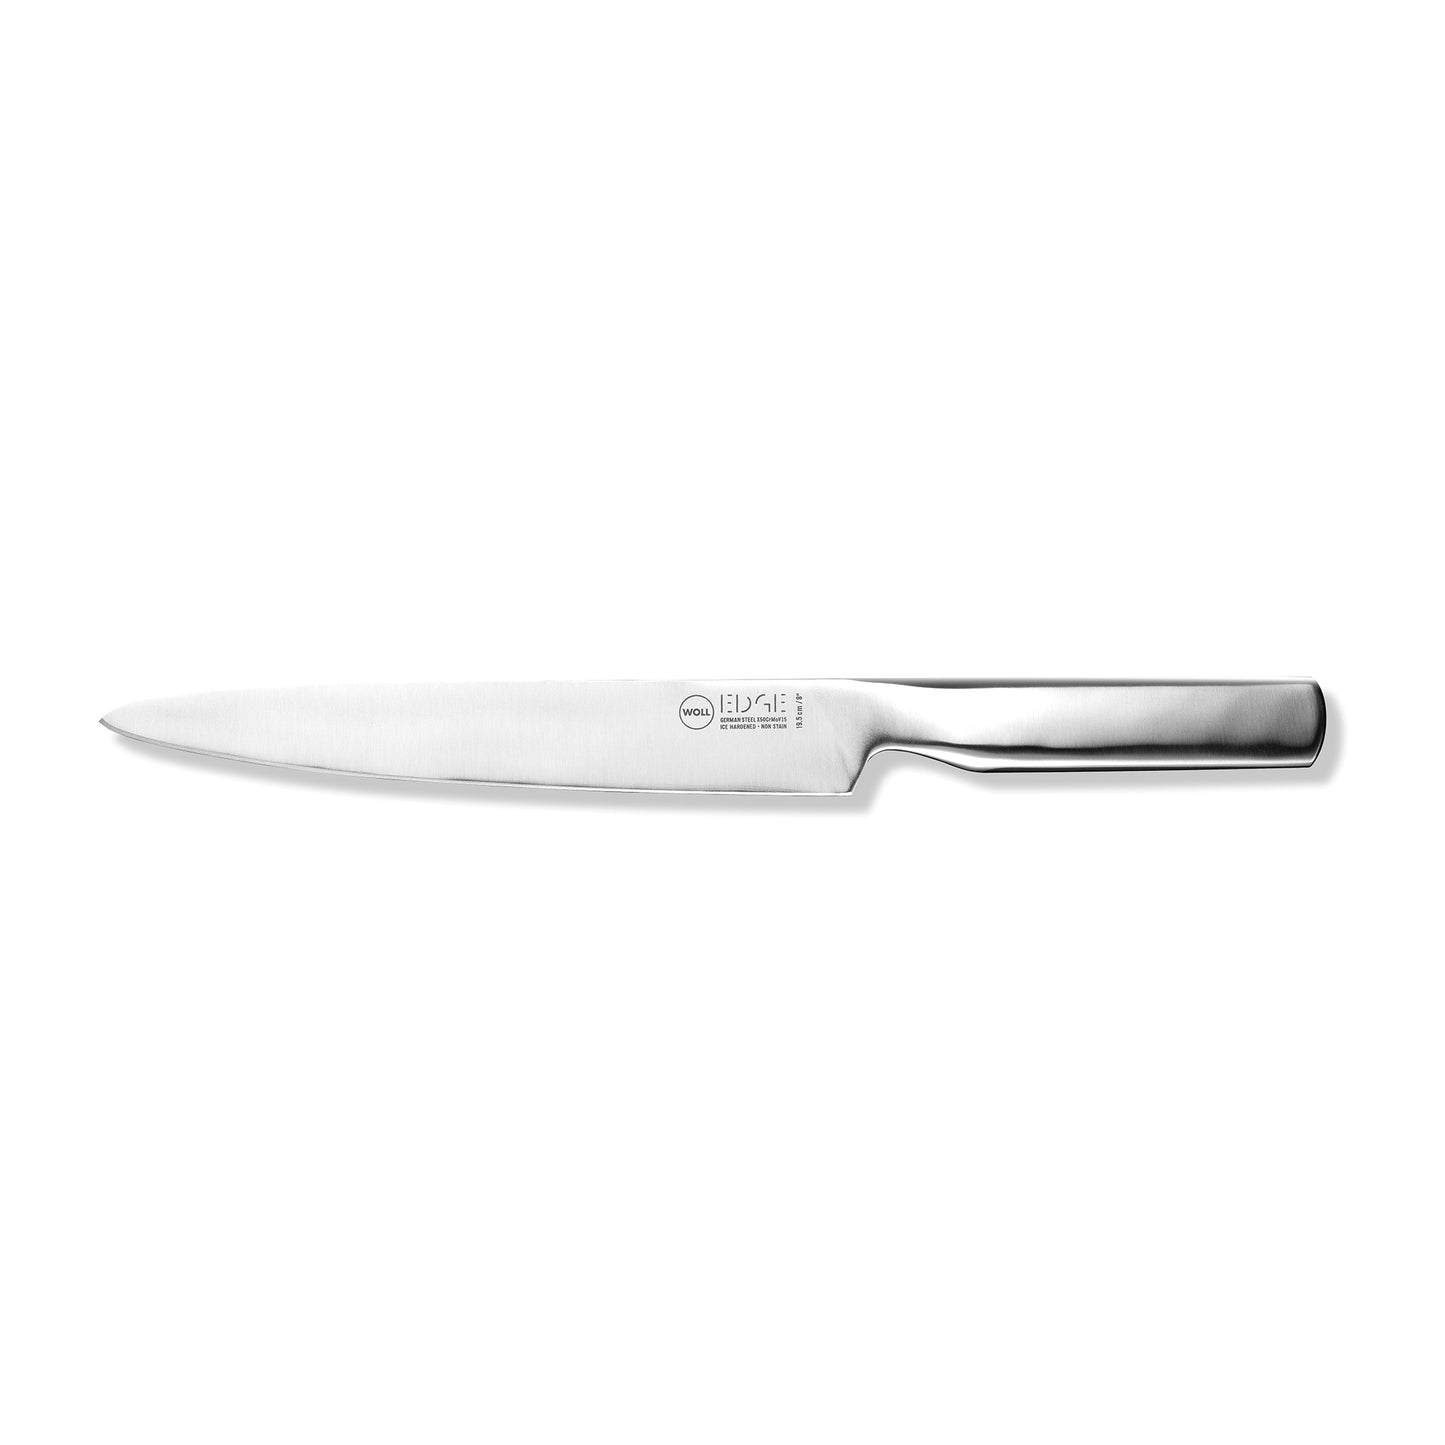 WOLL EDGE Carving Knife 19.5cm